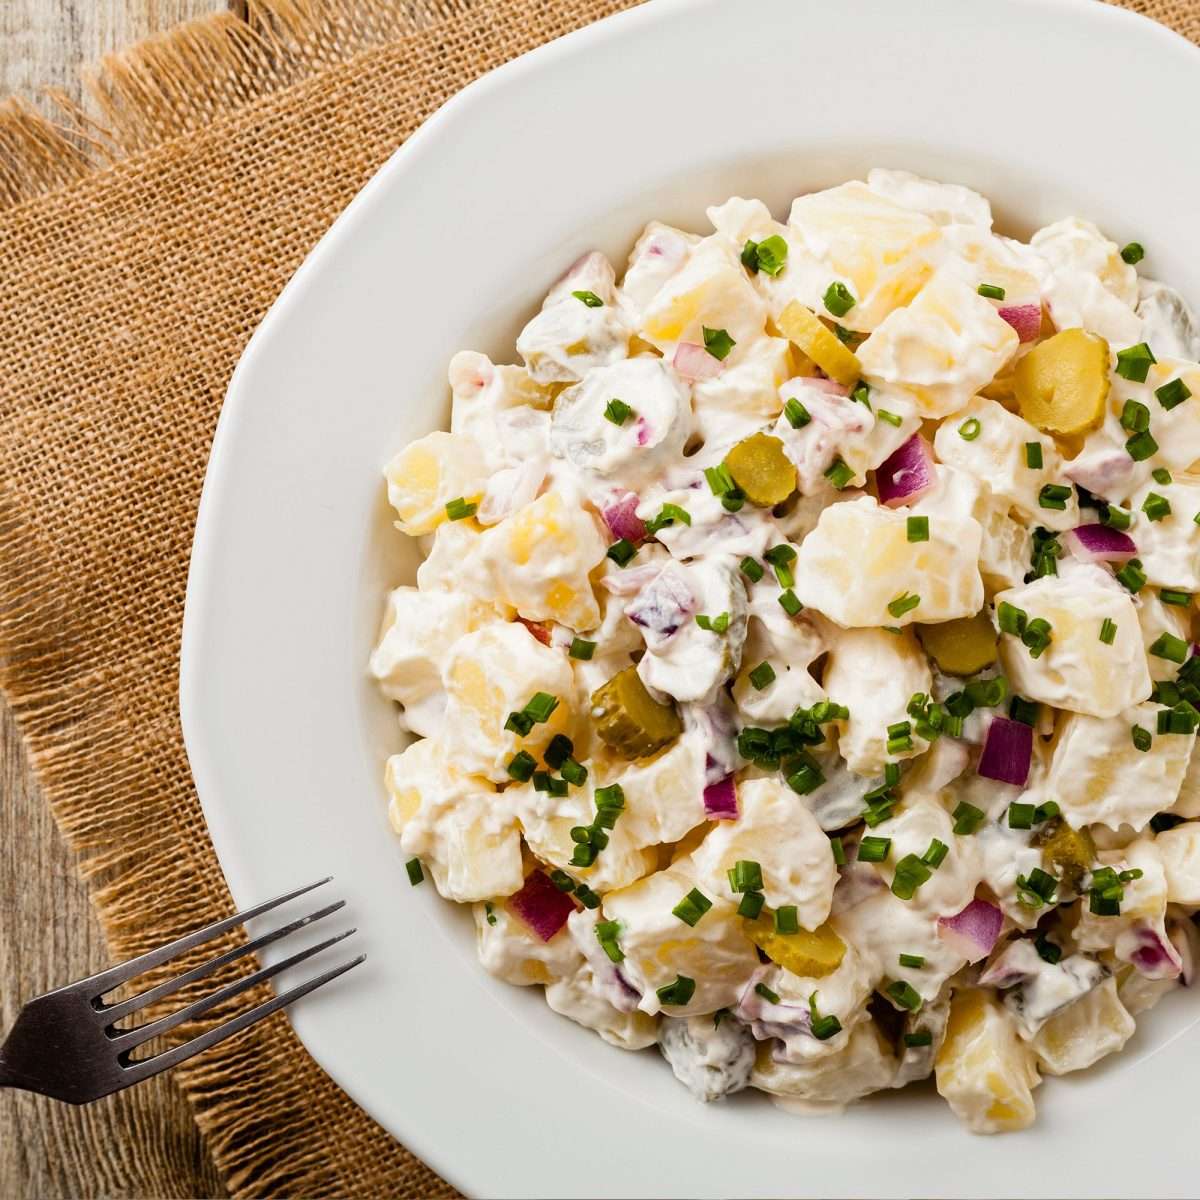 How To Make A Potato Salad With Mayonnaise